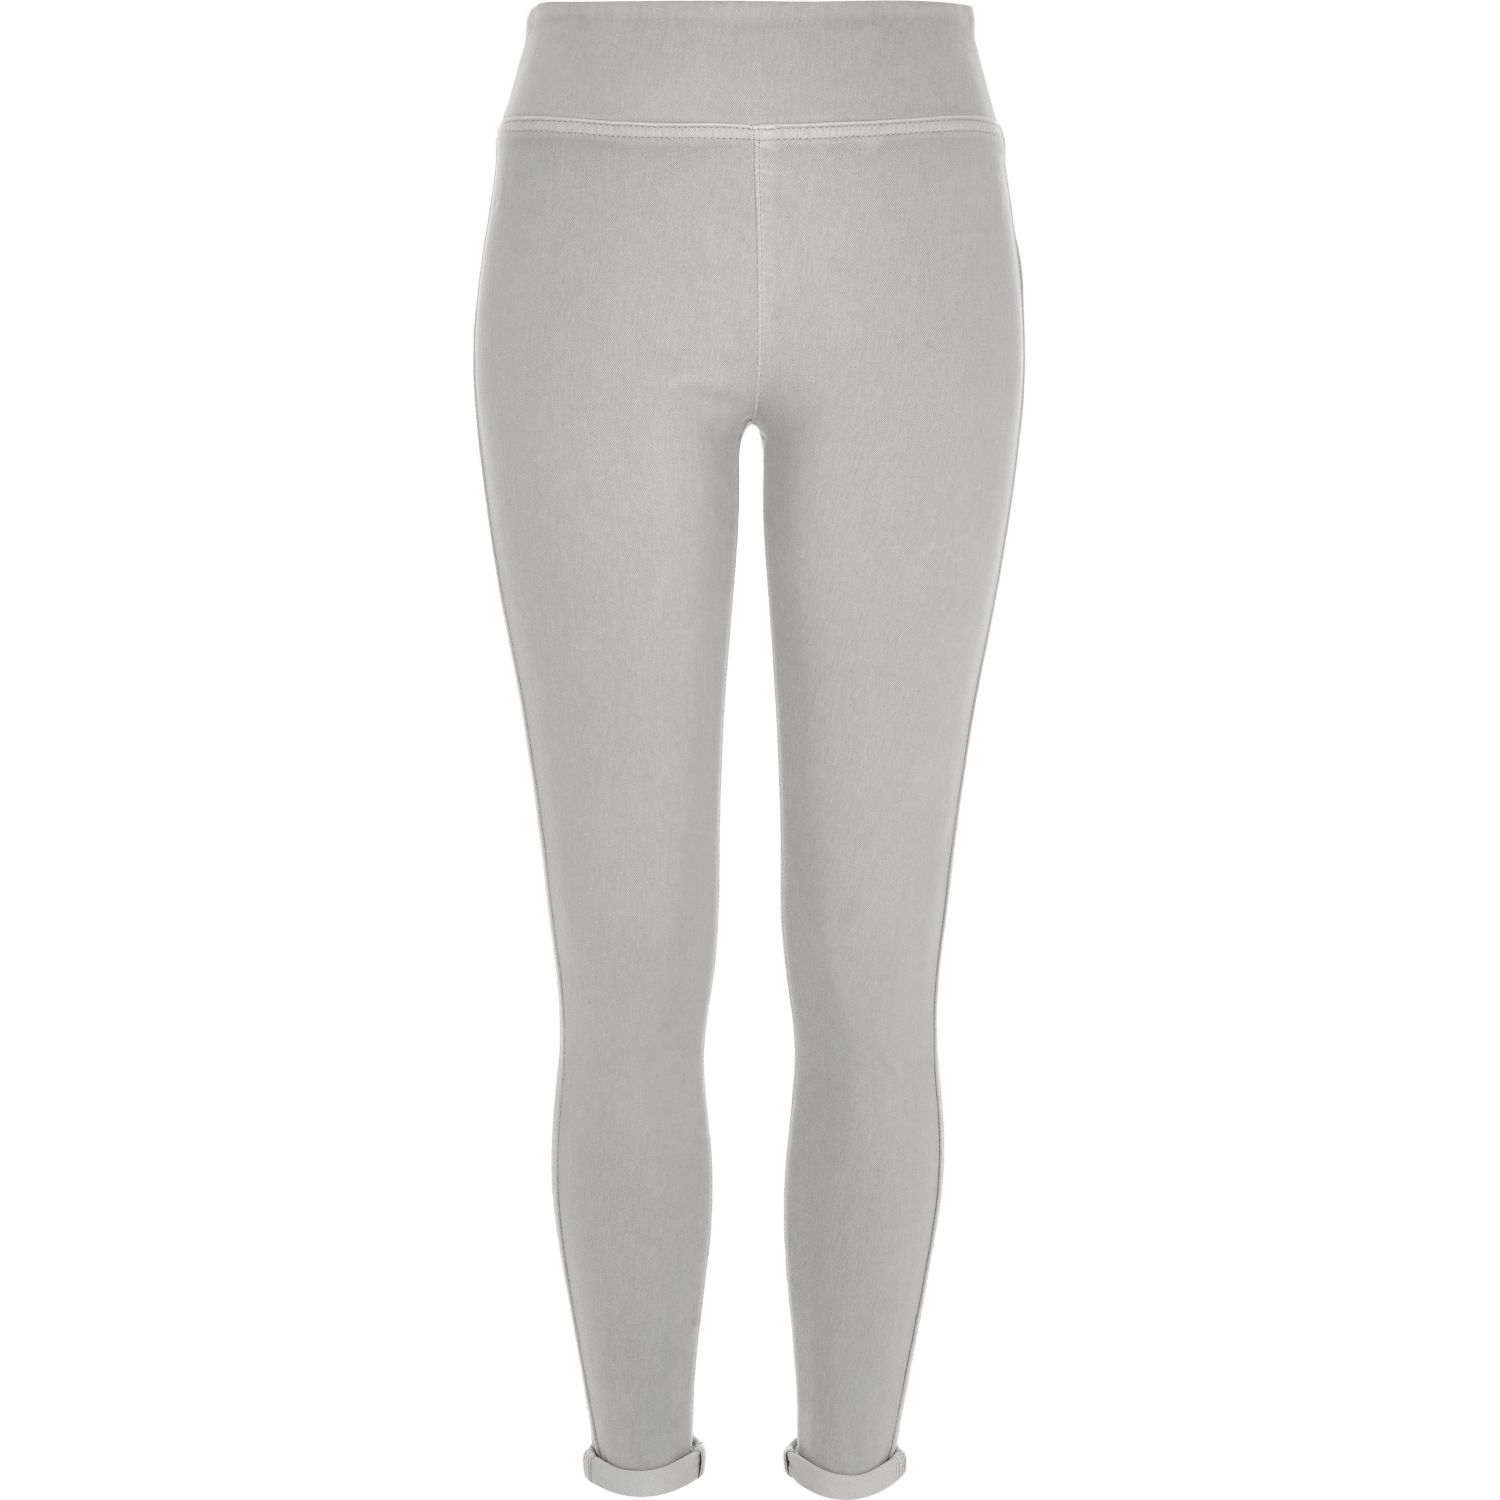 Lucy like light grey leggings for ladies men and fast